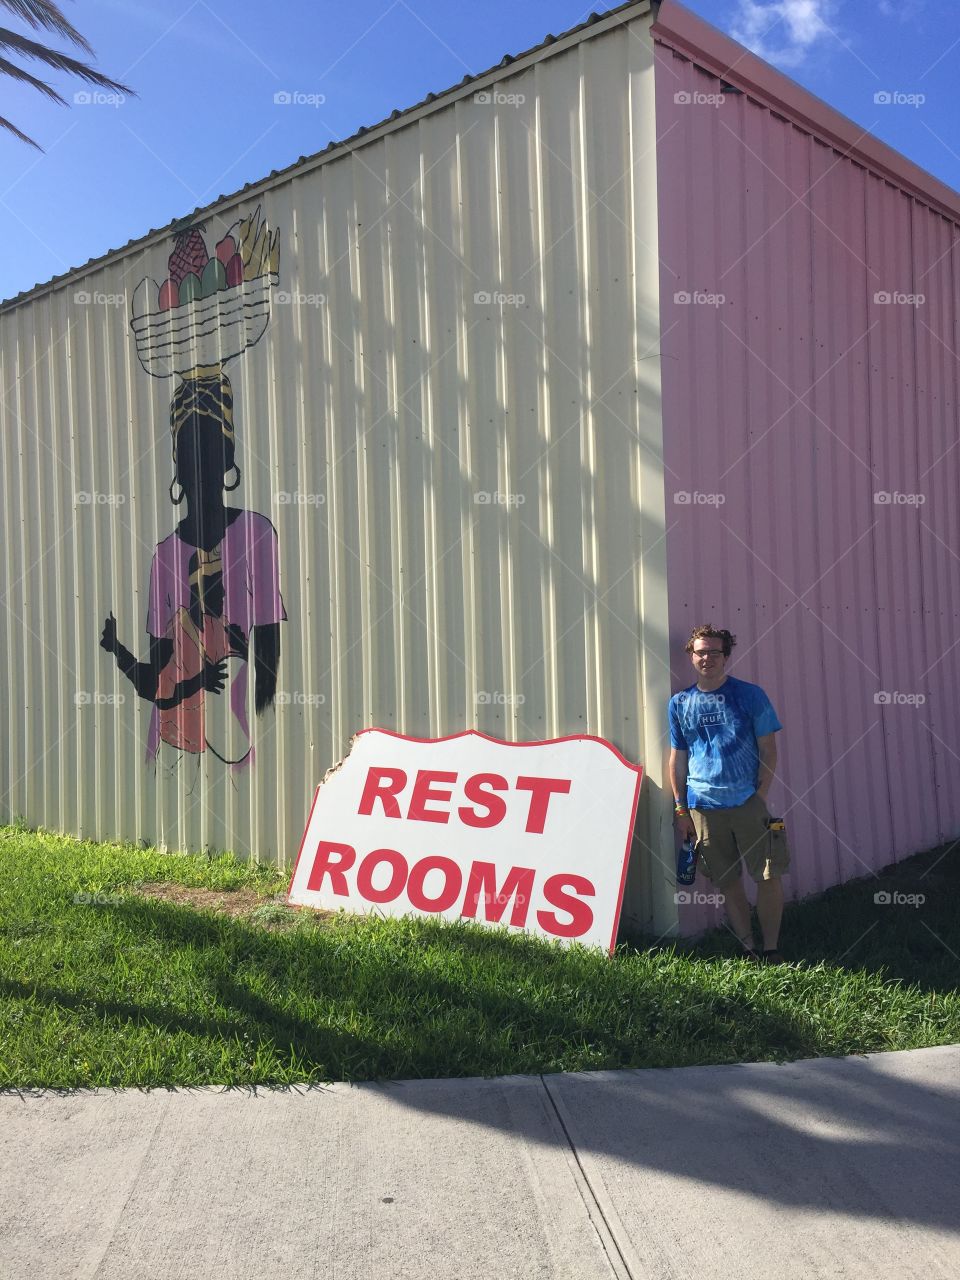 Nassau, Bahamas. I saw this sign and restrooms were no where to be found, I think they were hinting at ‘outdoor plumbing’